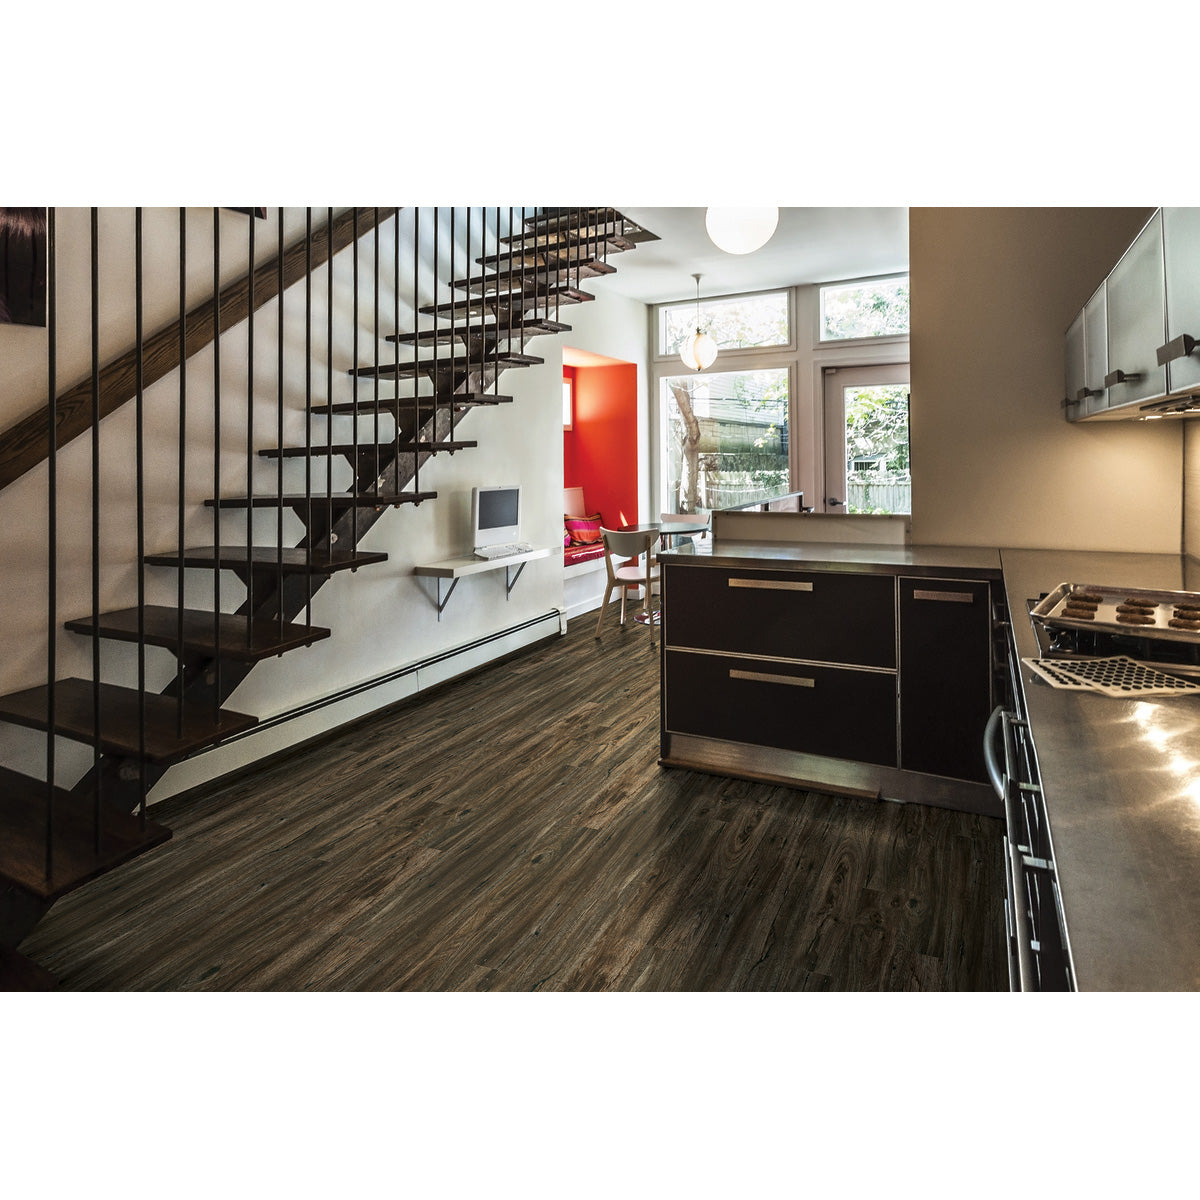 Engineered Floors - Triumph Collection - The New Standard II - 6 in. x 48 in. - Caicos